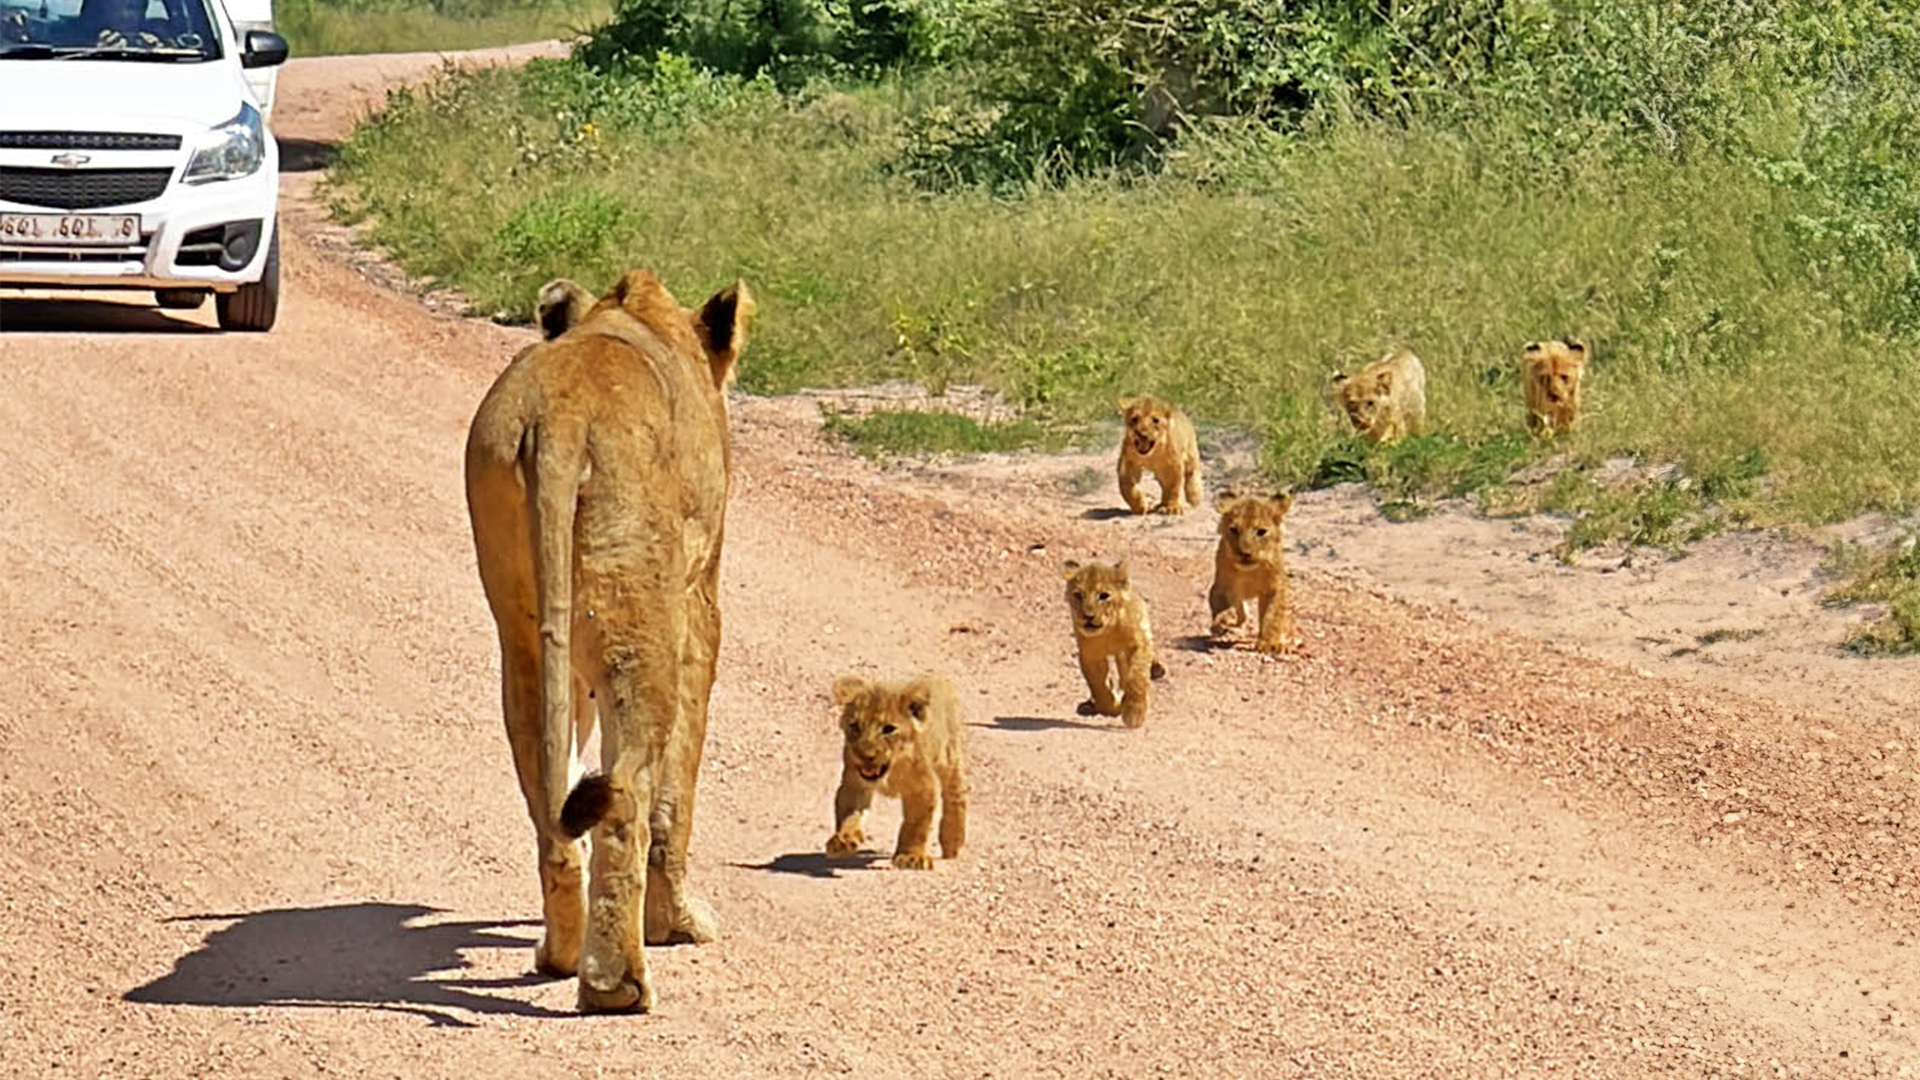 6 Tiny Lion Cubs Race to Keep up With Mommy